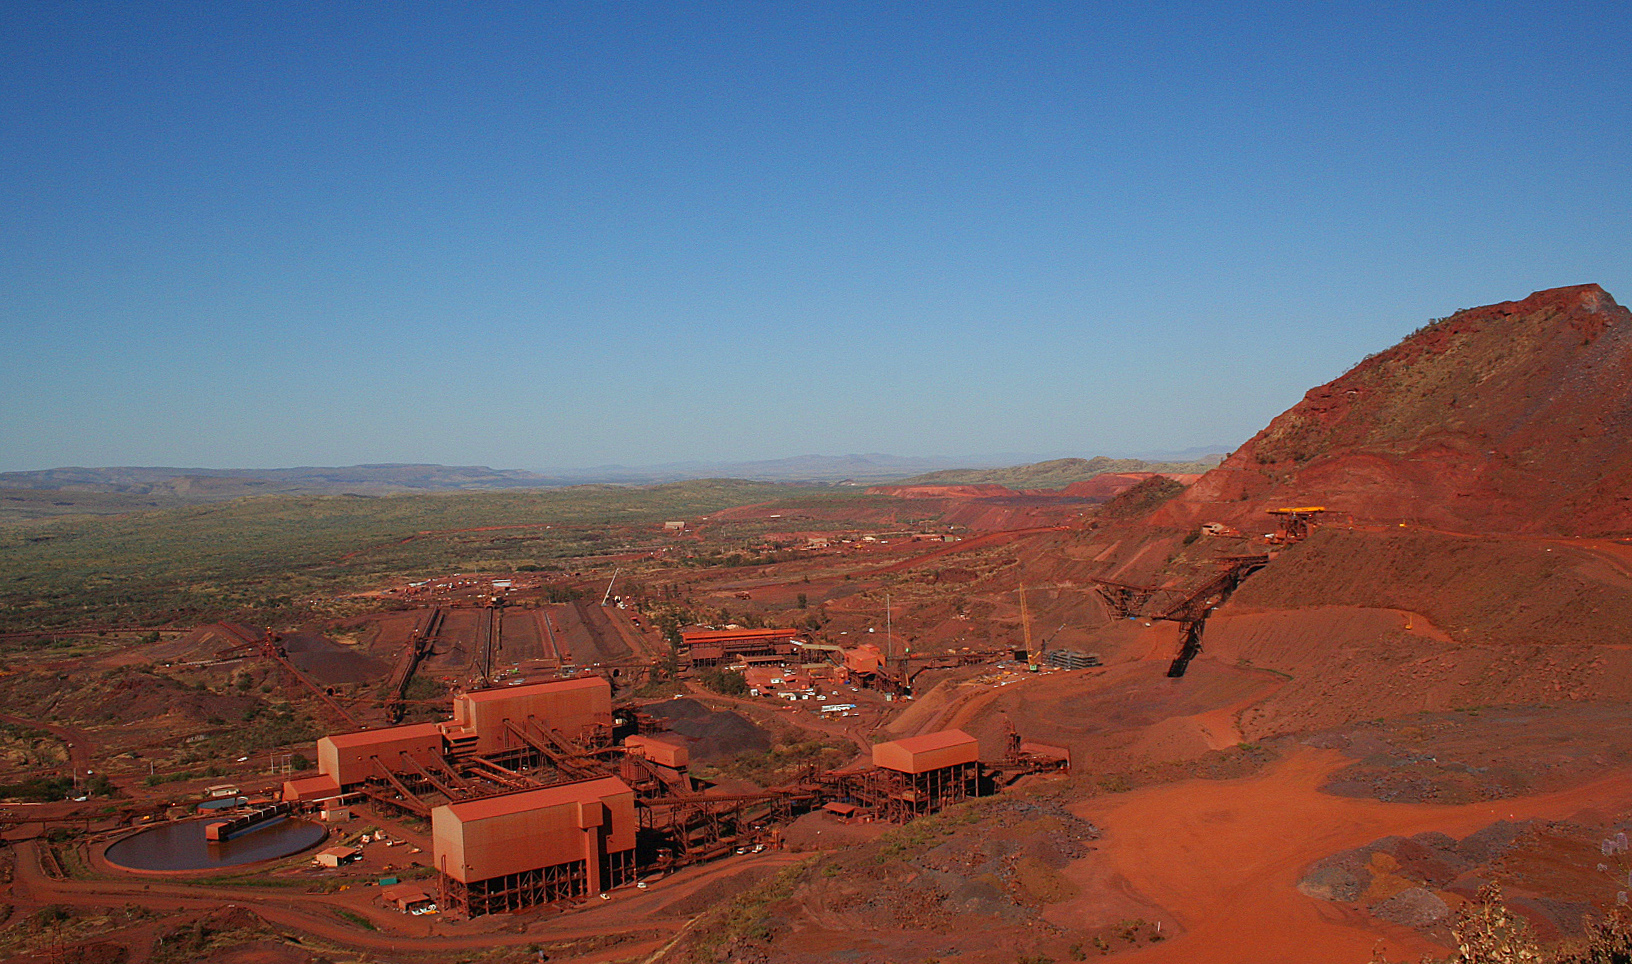 IronOre